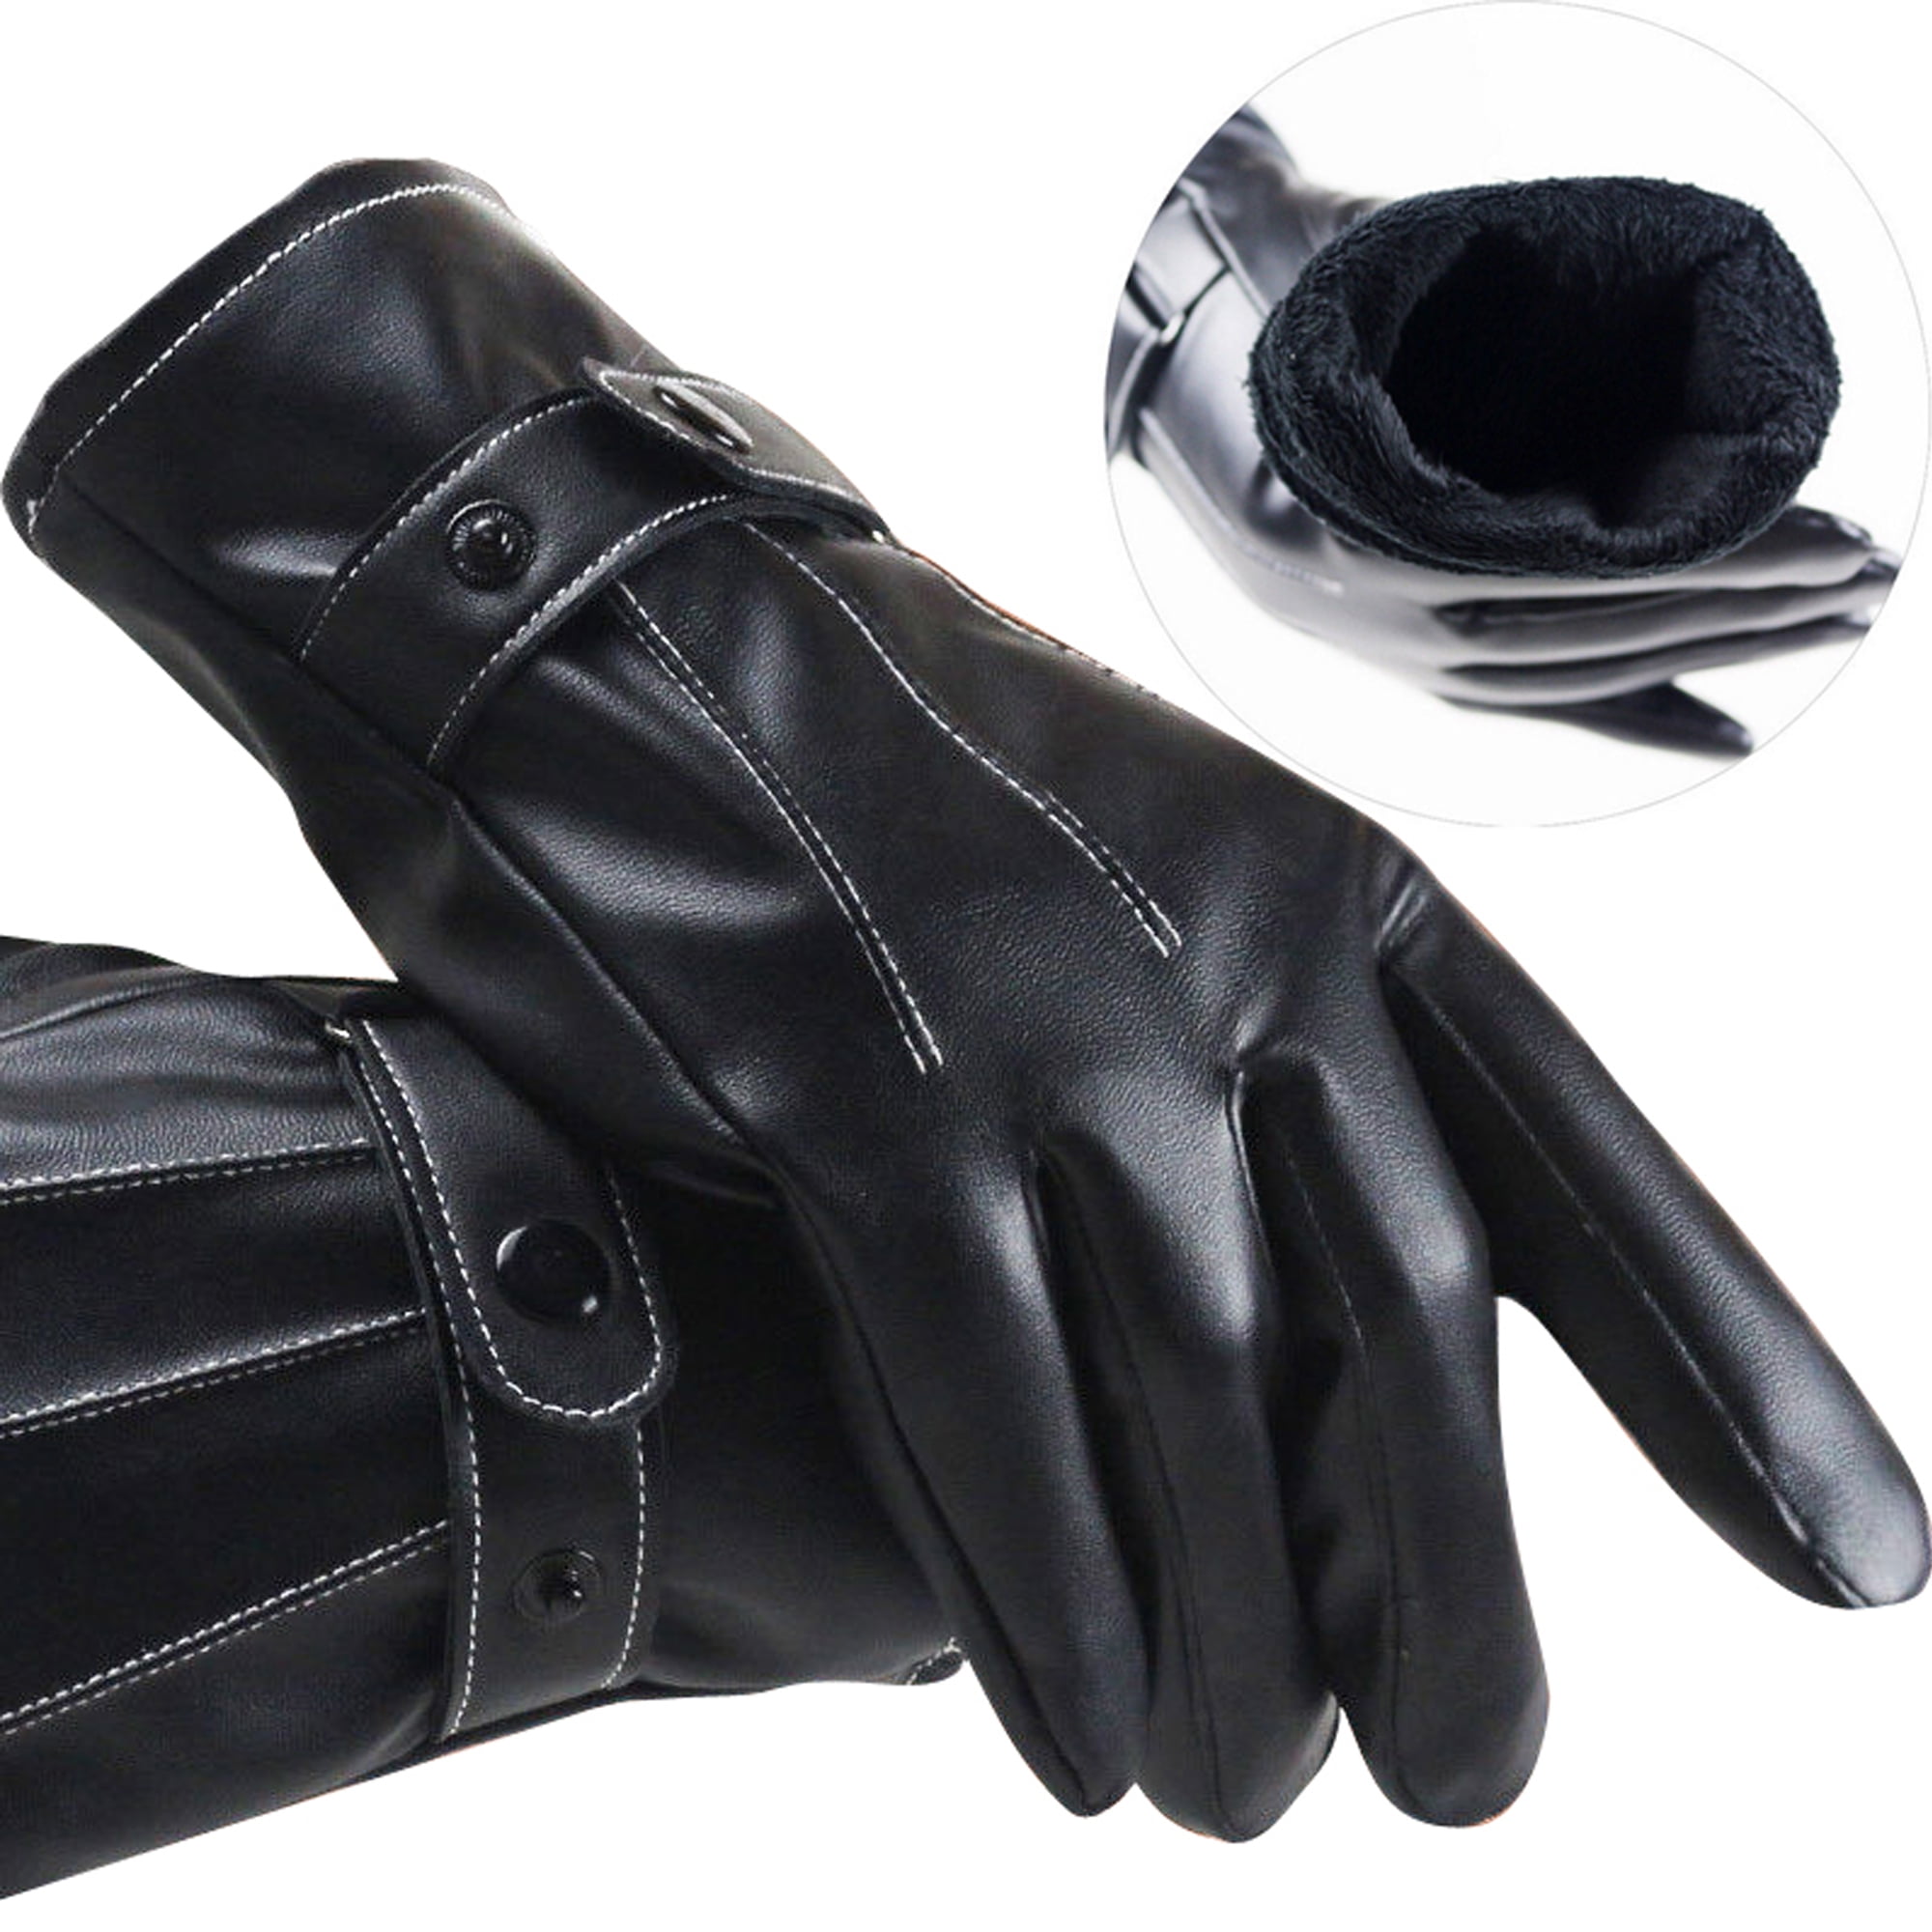 Winter Men Leather Gloves Motorcycle Full Finger Touch Screen Driving Warm US 